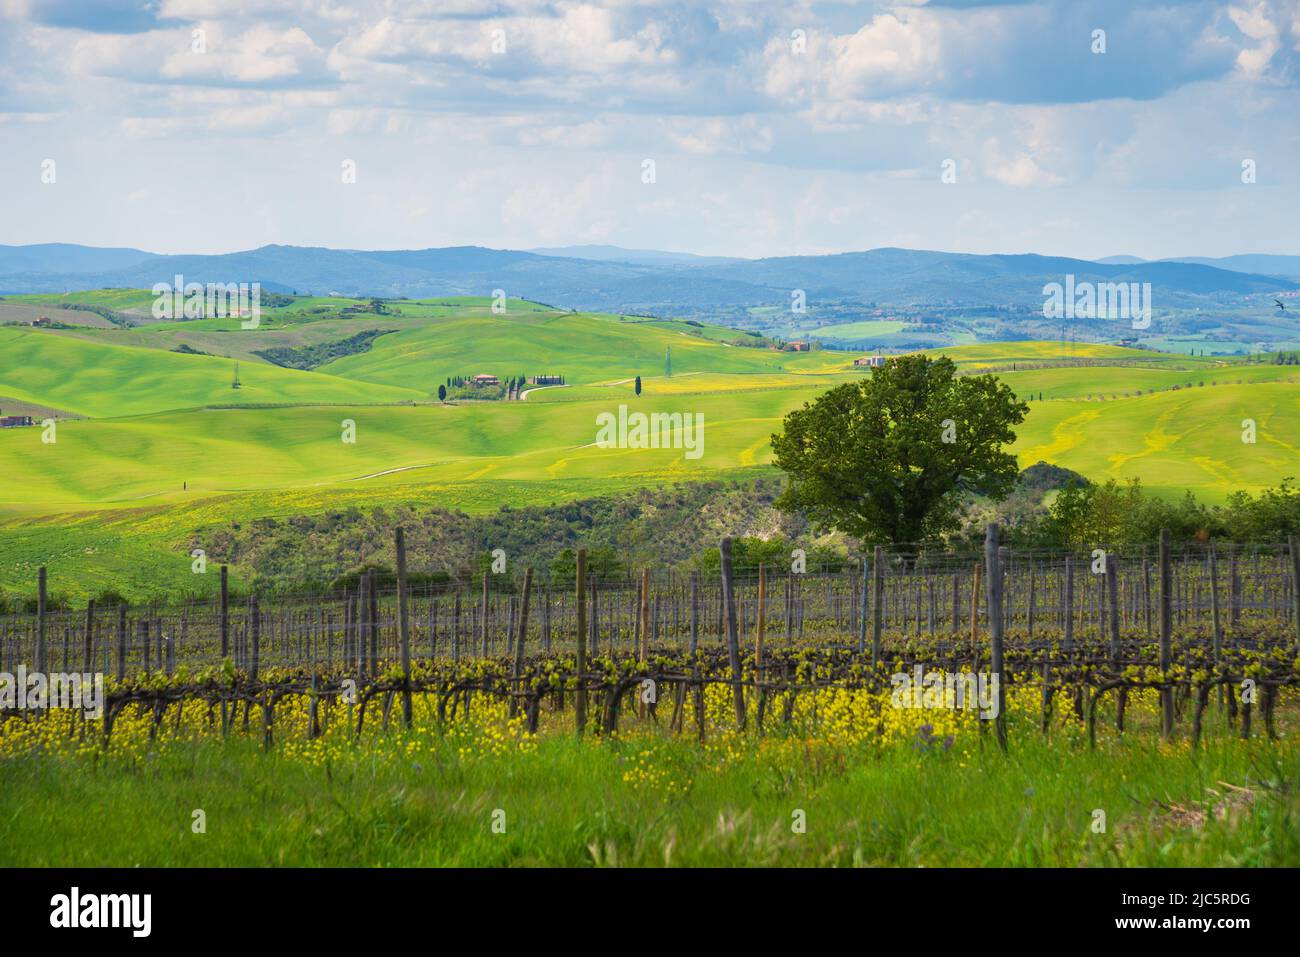 Tuscany, Italy. Val d'Orcia scenic rolling hills landscape with vineyard and blooming rape flowers covering meadows under beautiful sky. Stock Photo